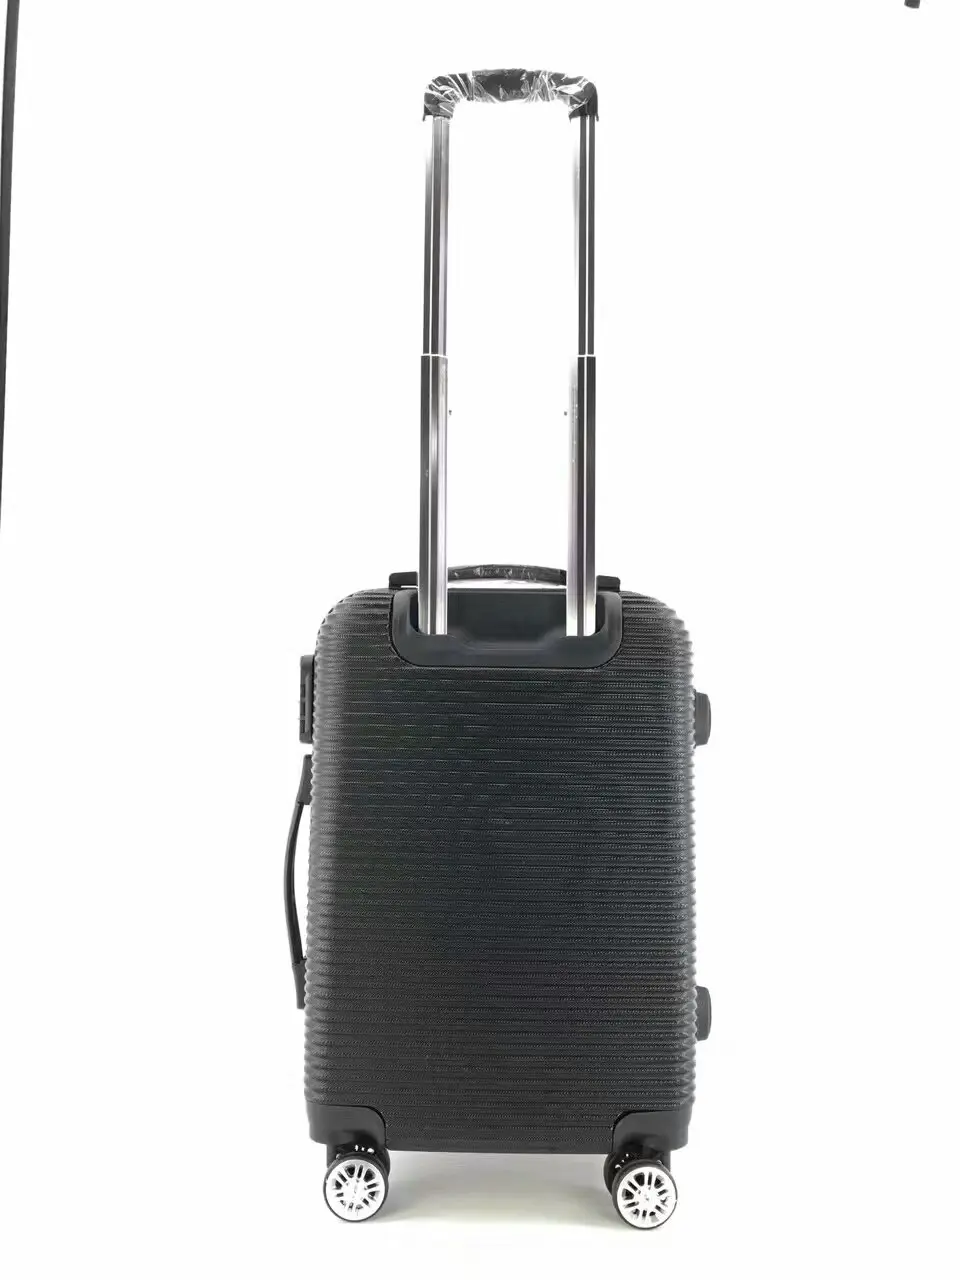 20 24 28 Inch Cheap Travelling Lightweight Carry On Abs Luggage Bags Luggage Set - Buy Luggage ...